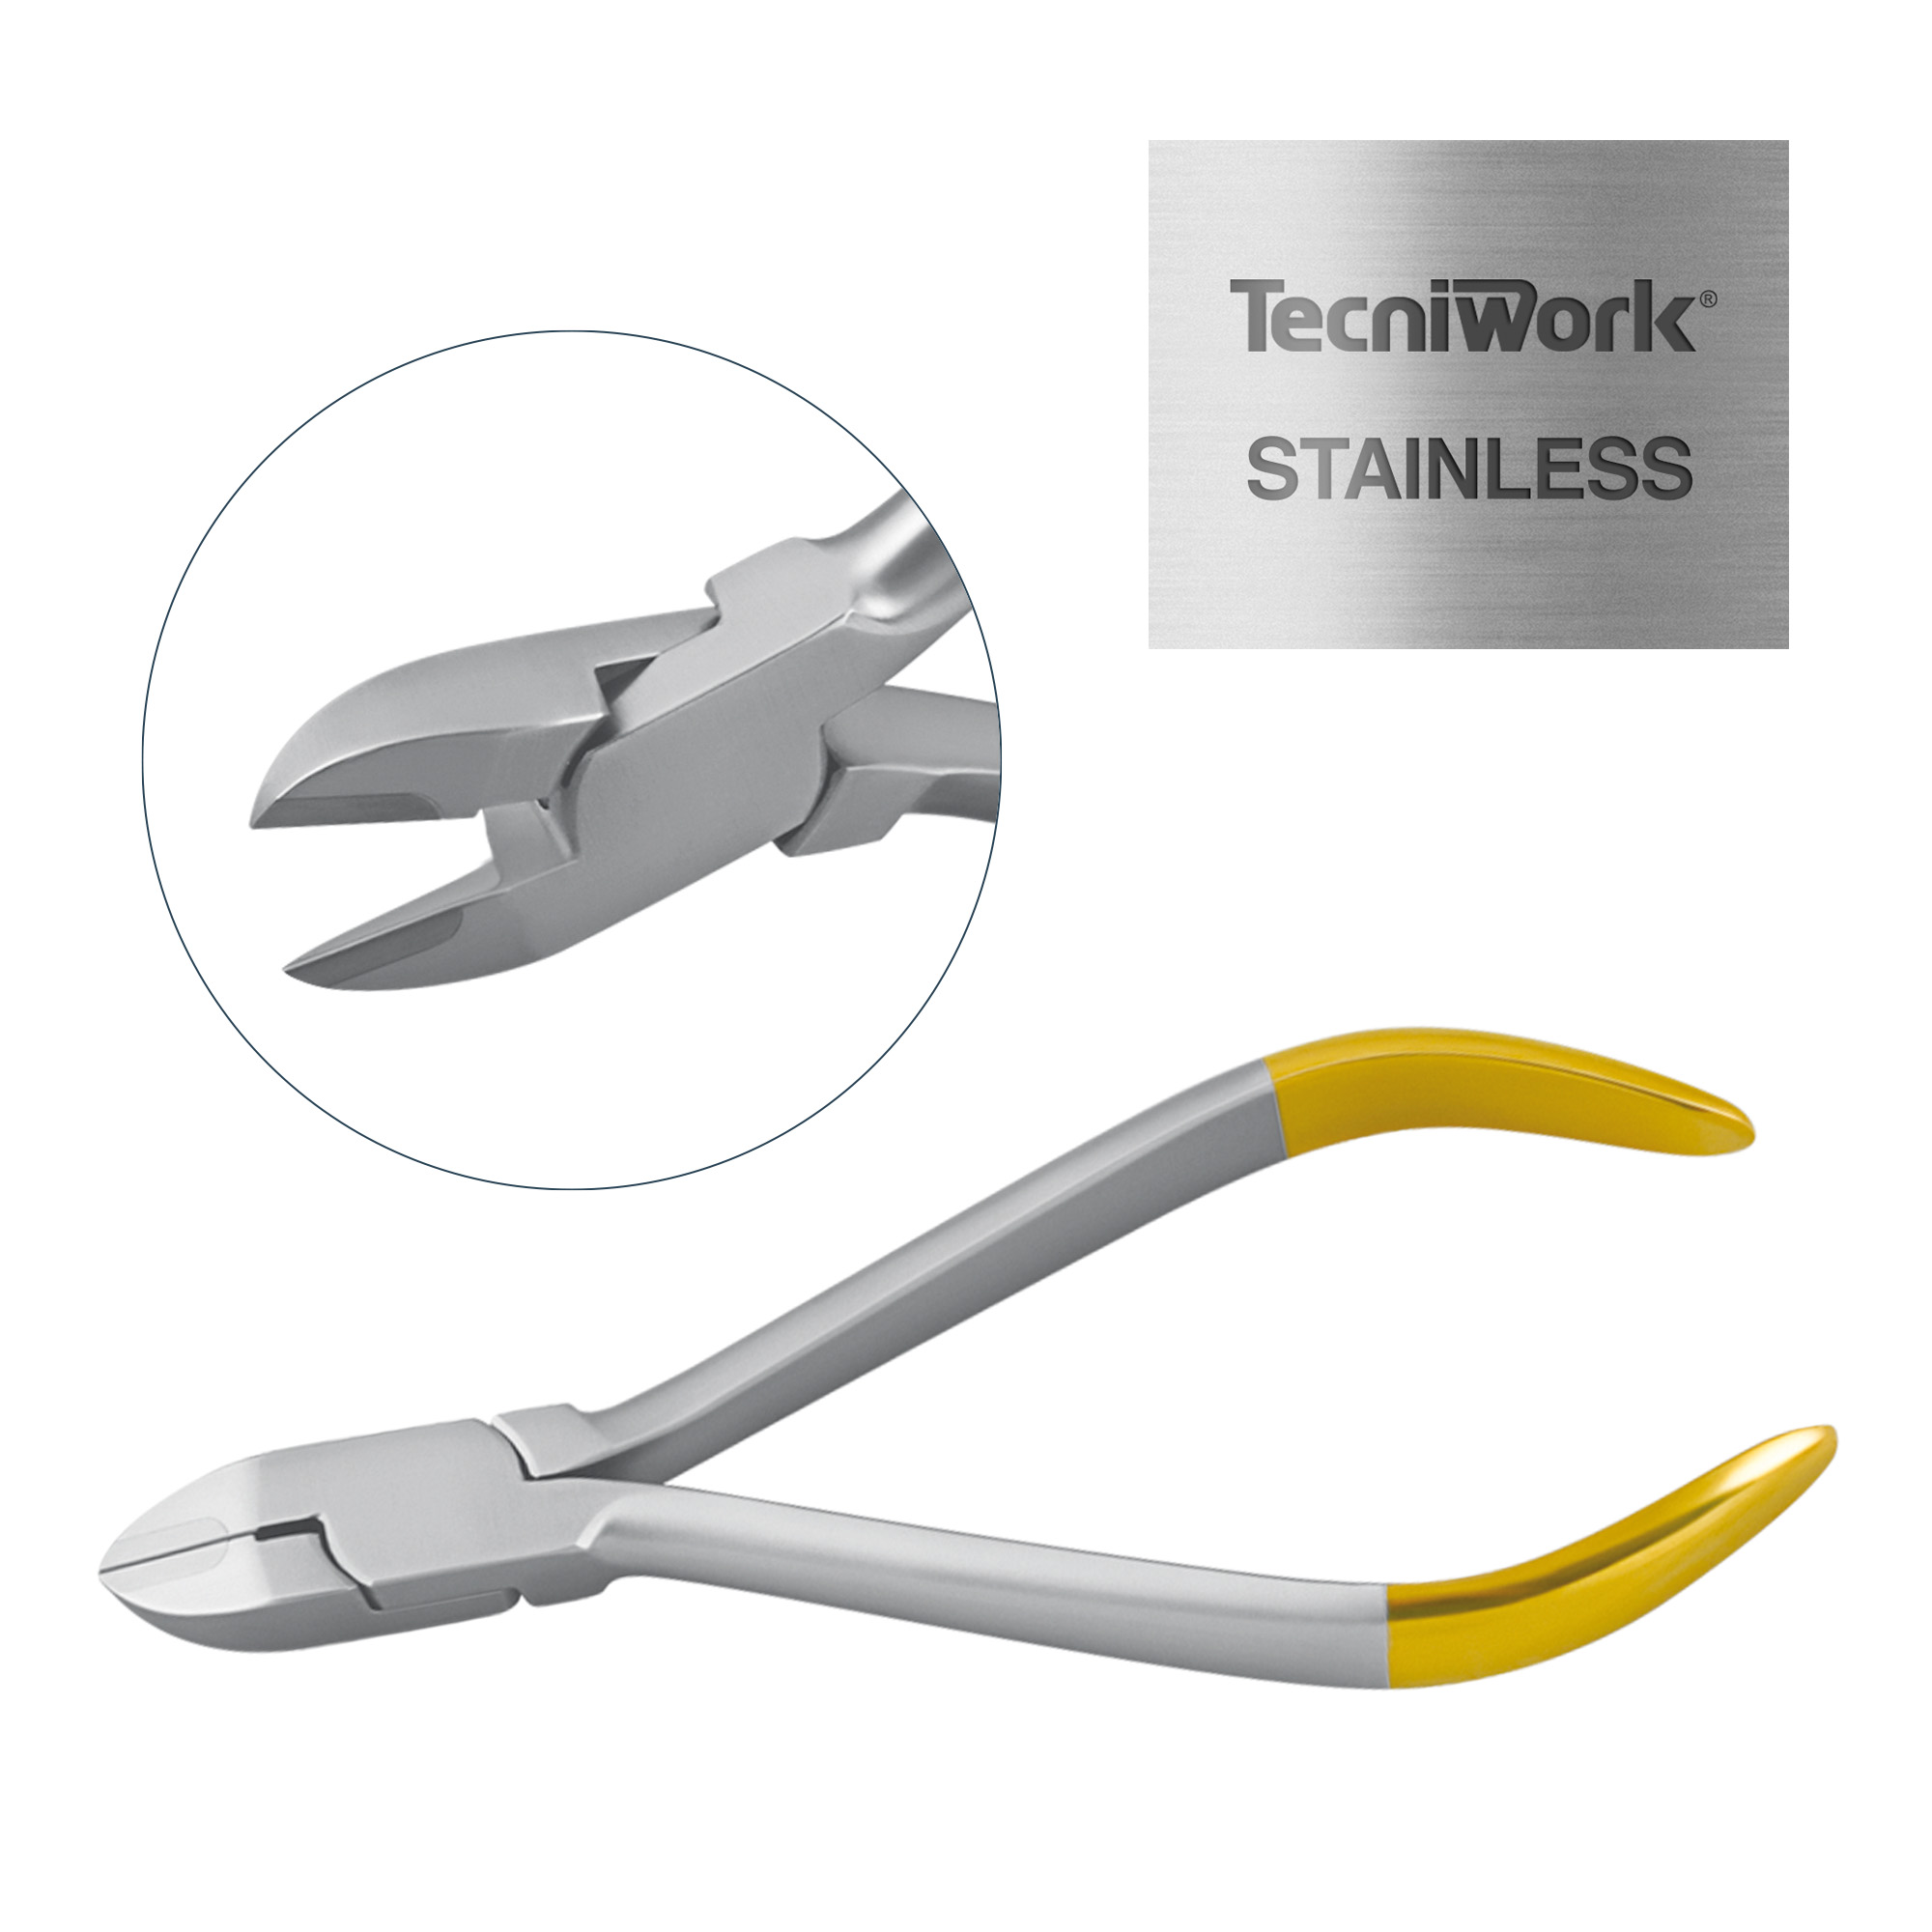 Stainless Steel nippers for Titanium Hard Wire